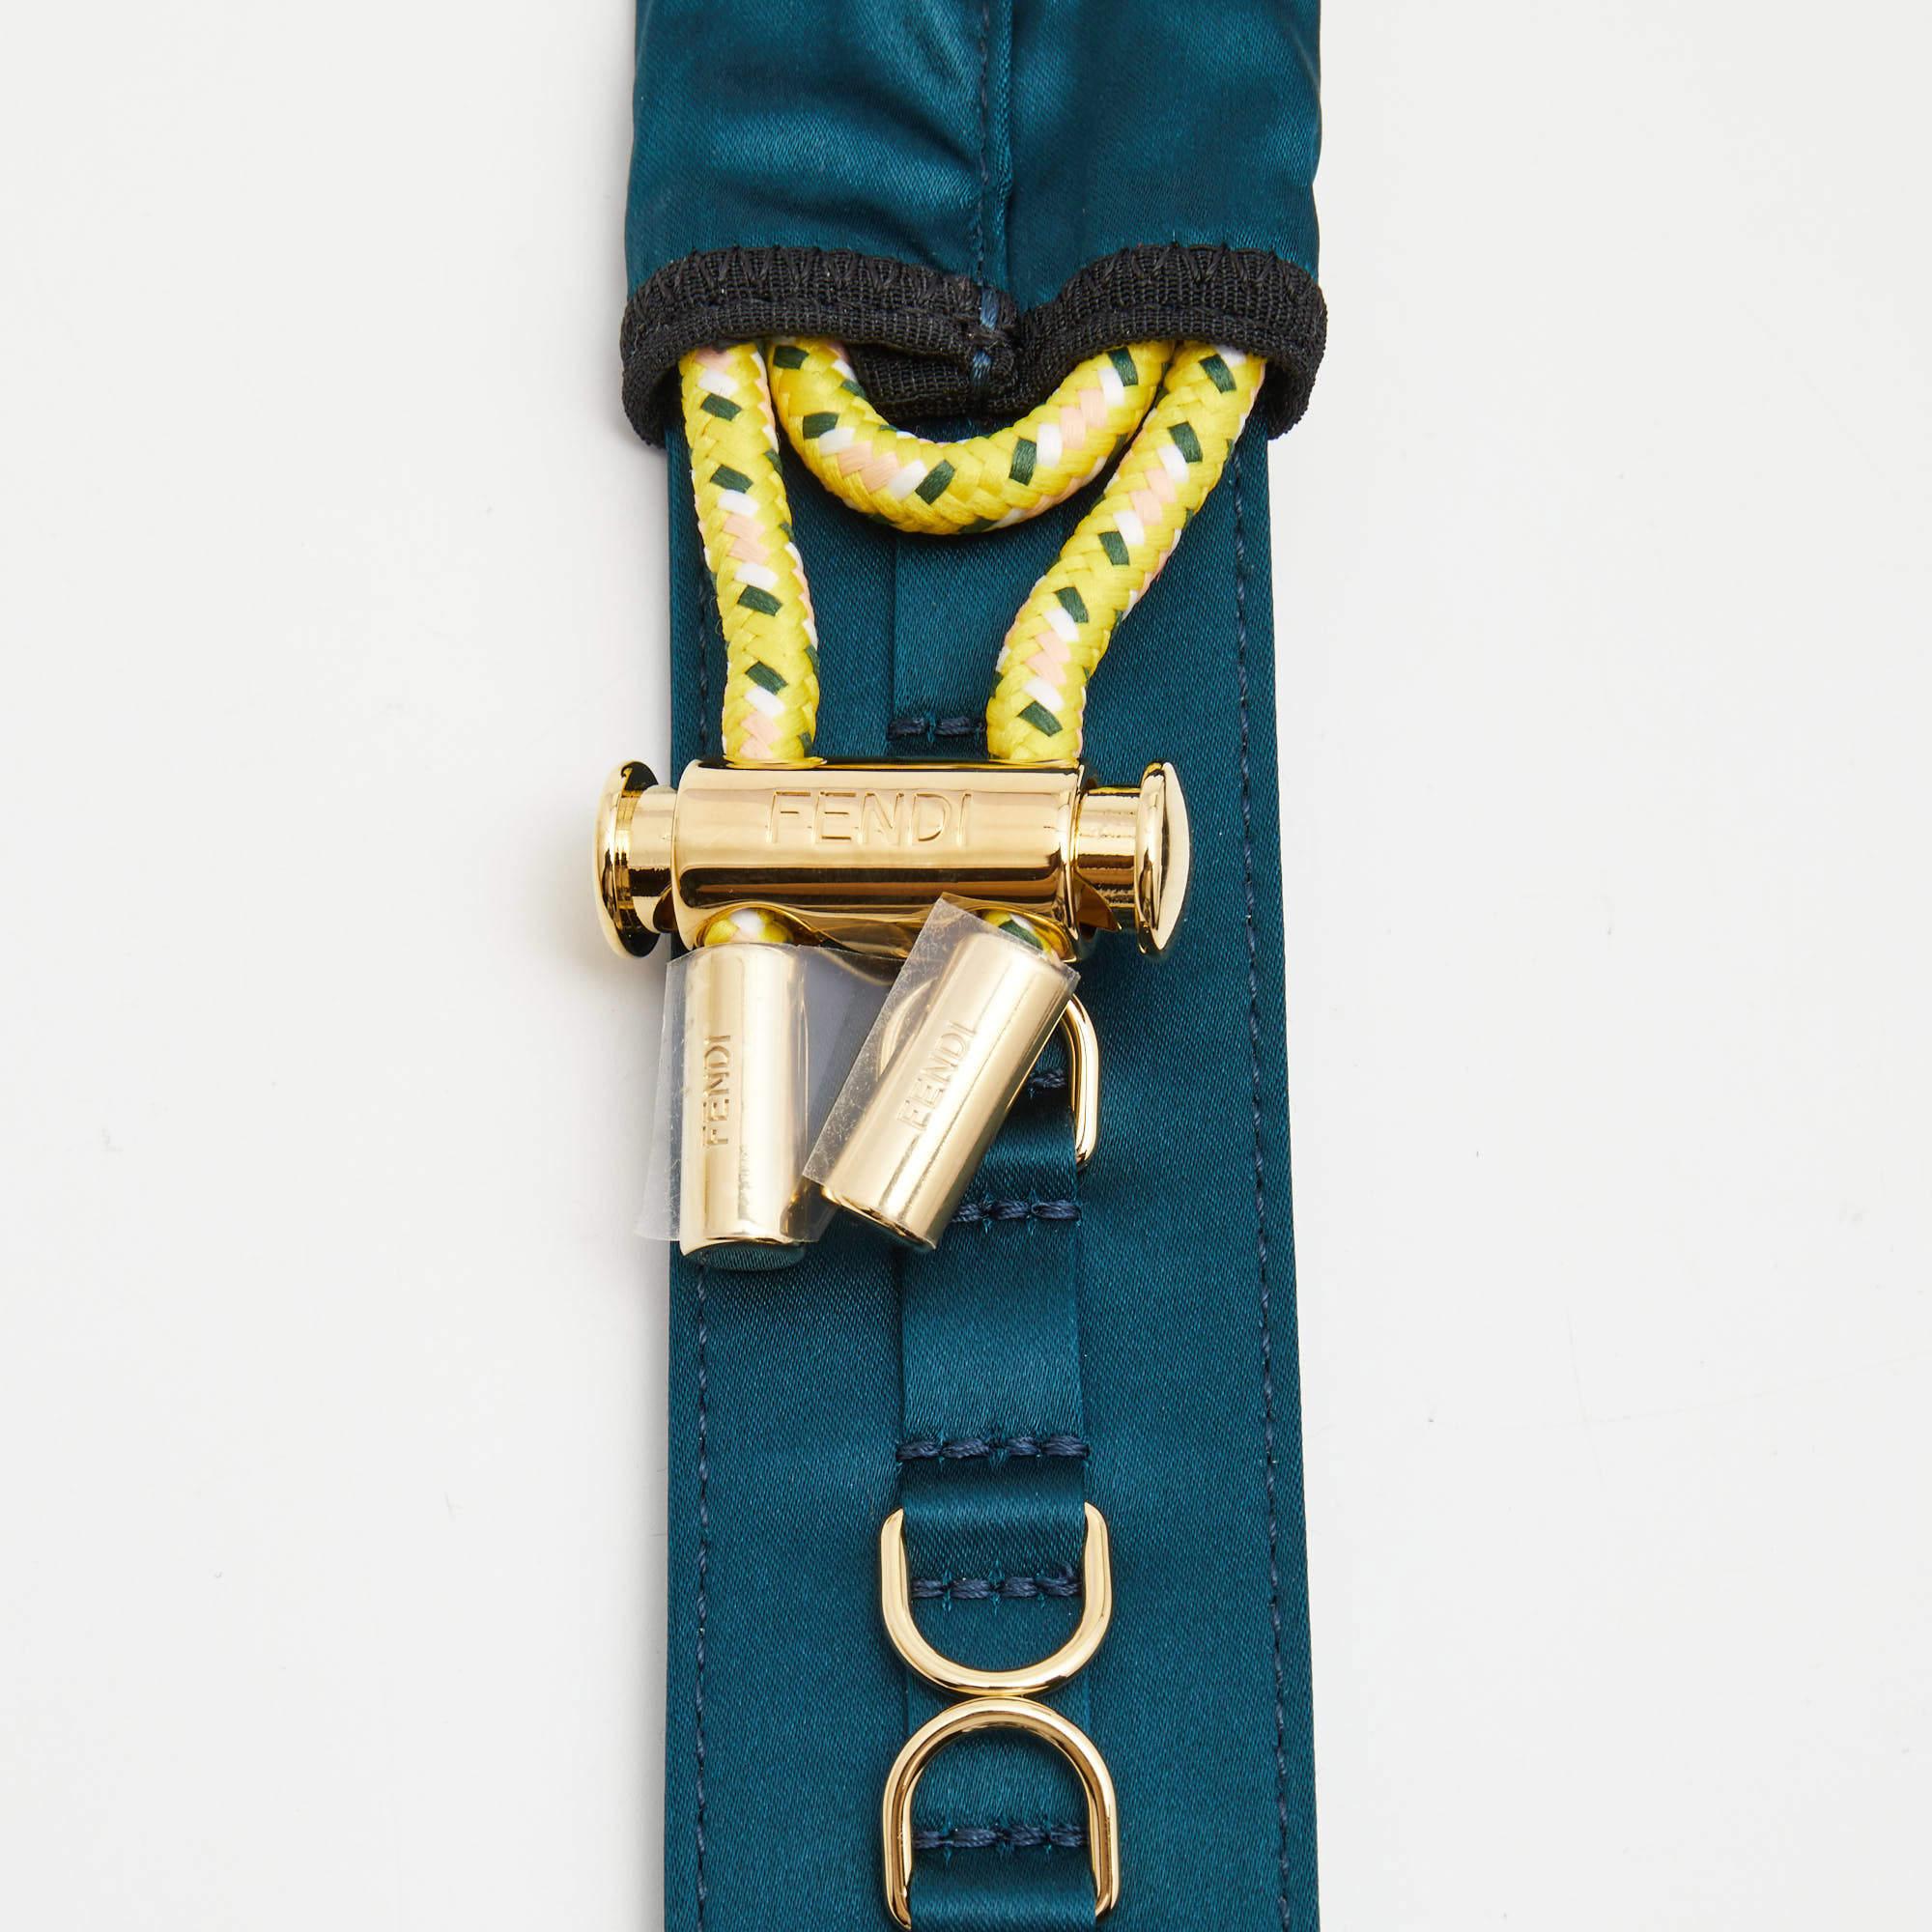 Enhance your style with the Fendi shoulder strap. Crafted with luxurious satin and adorned with a teal shade, this exquisite accessory adds a touch of elegance and sophistication to your handbag, making it a must-have for fashion